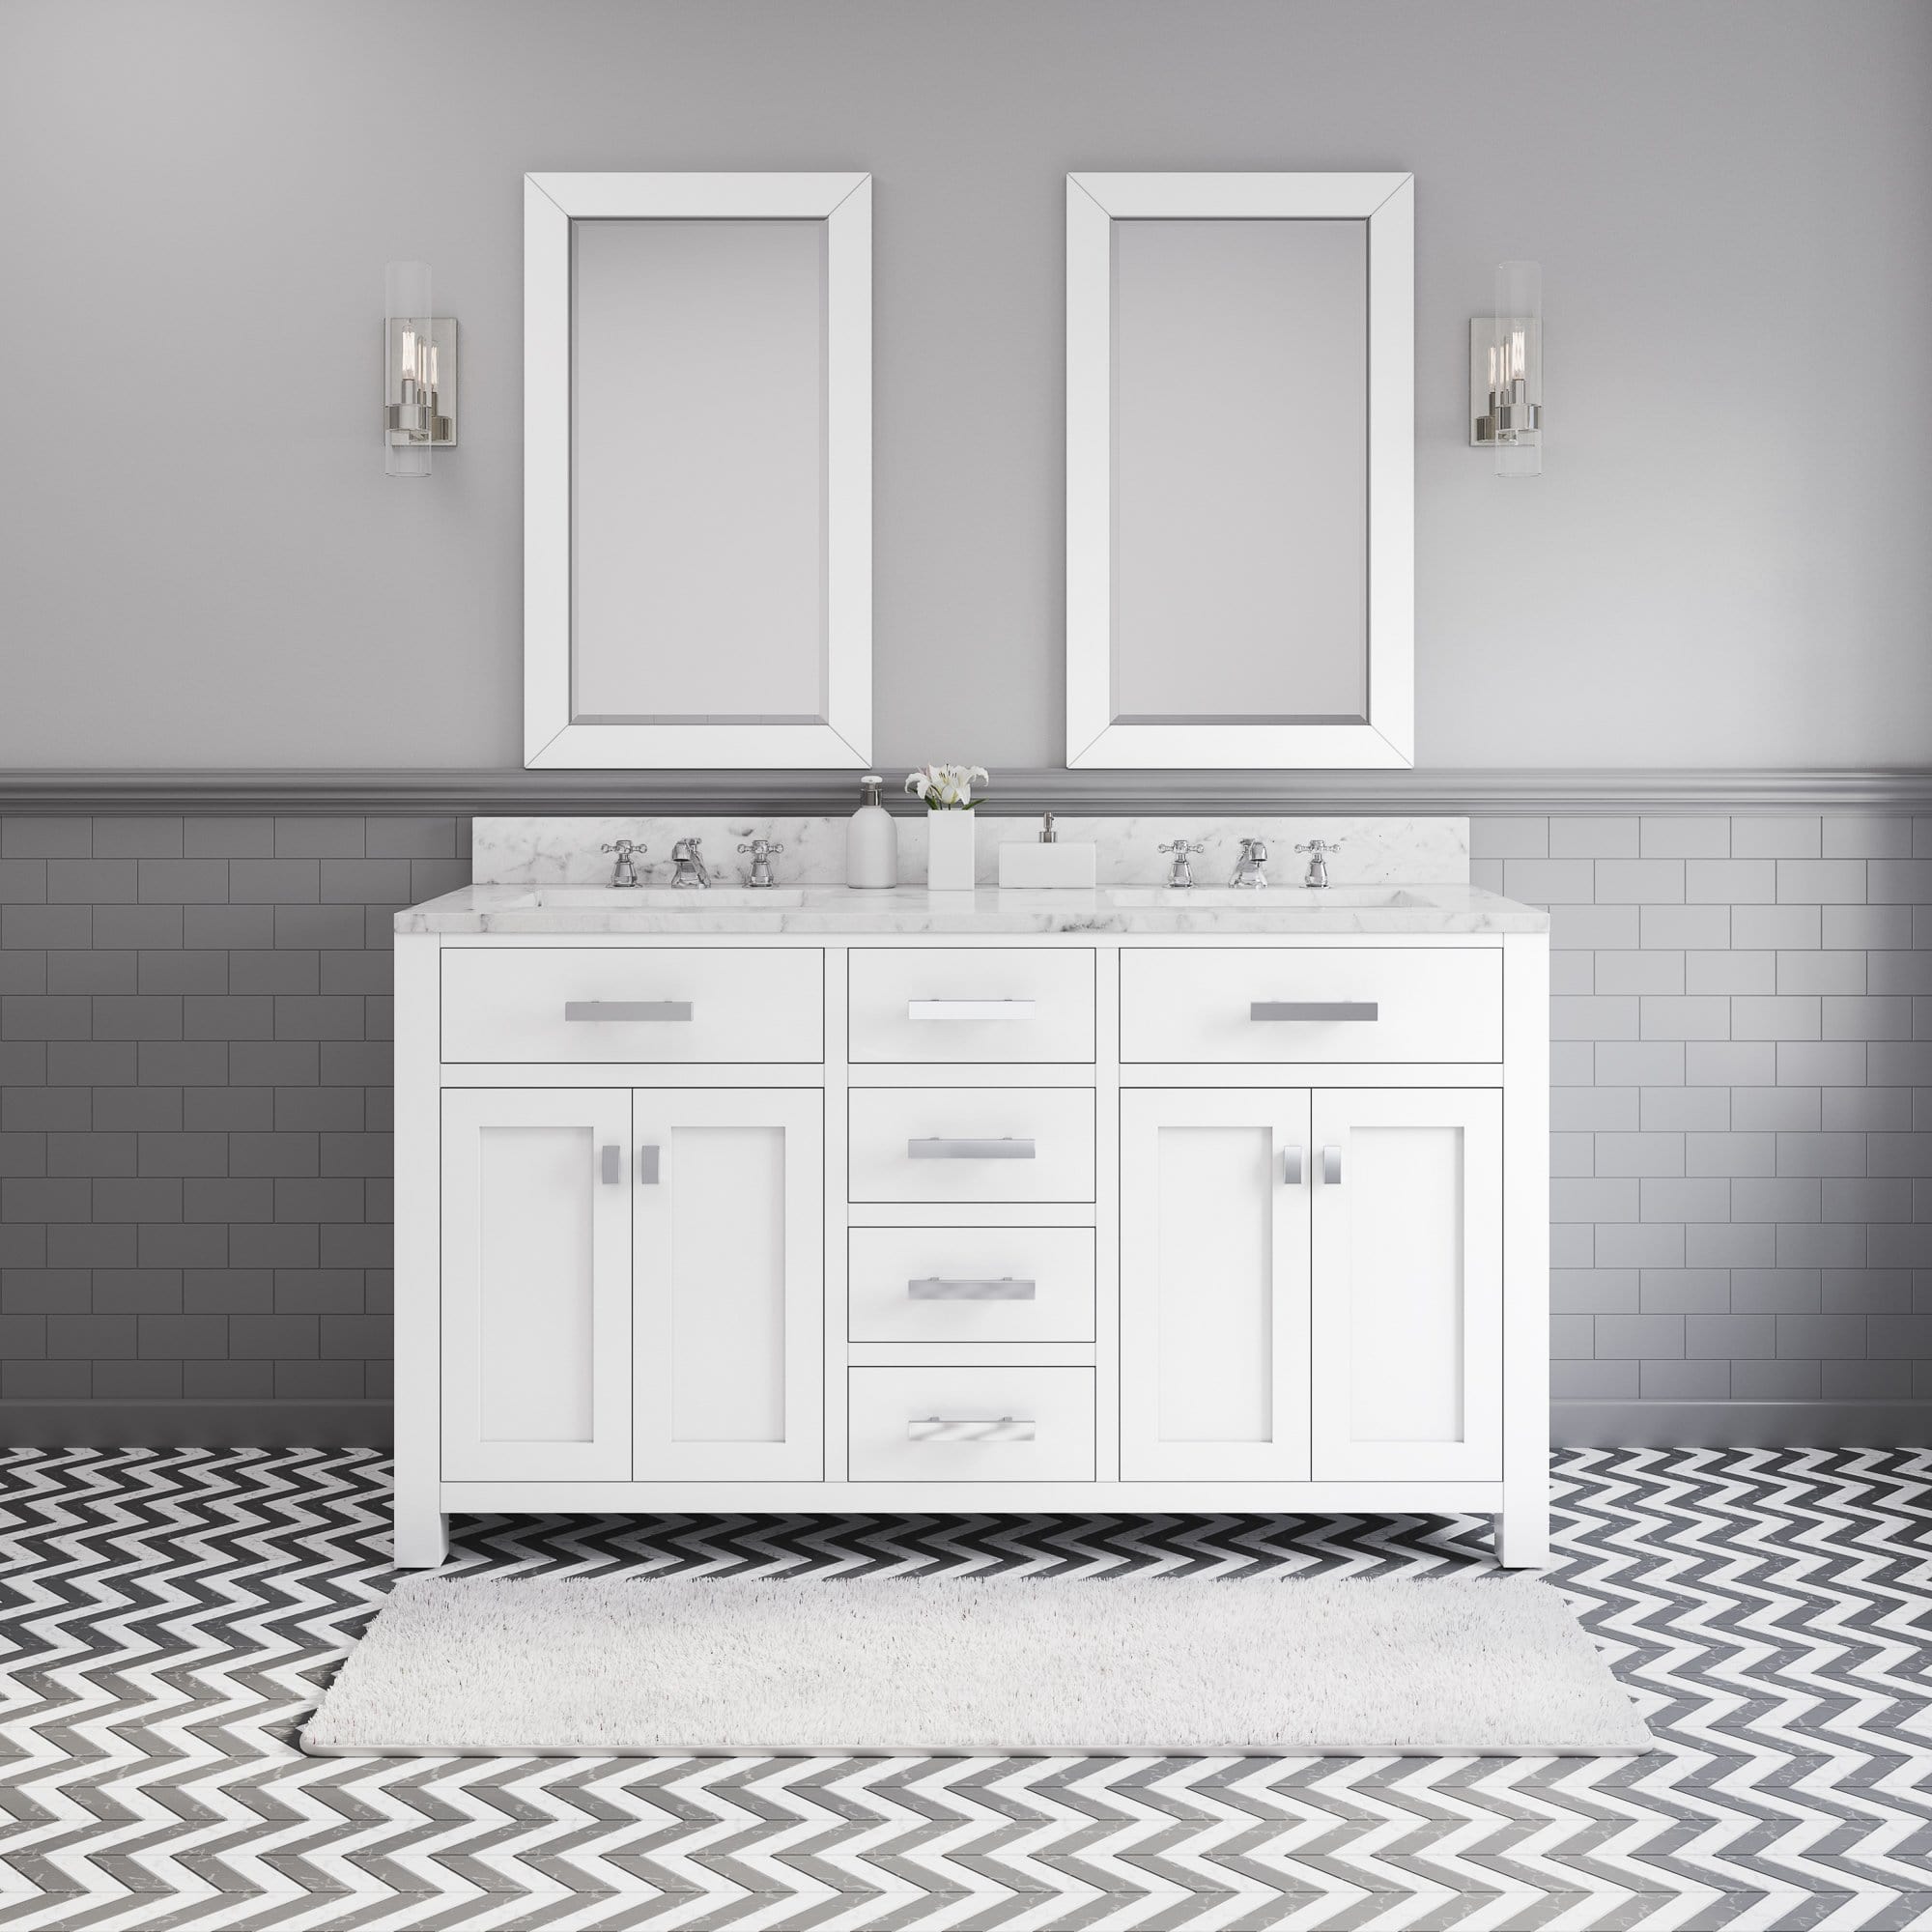 Water Creation 60 Inch Pure White Double Sink Bathroom Vanity With 2 Matching Framed Mirrors From The Madison Collection - Molaix700621682424Bathroom vanityMS60CW01PW-R21000000